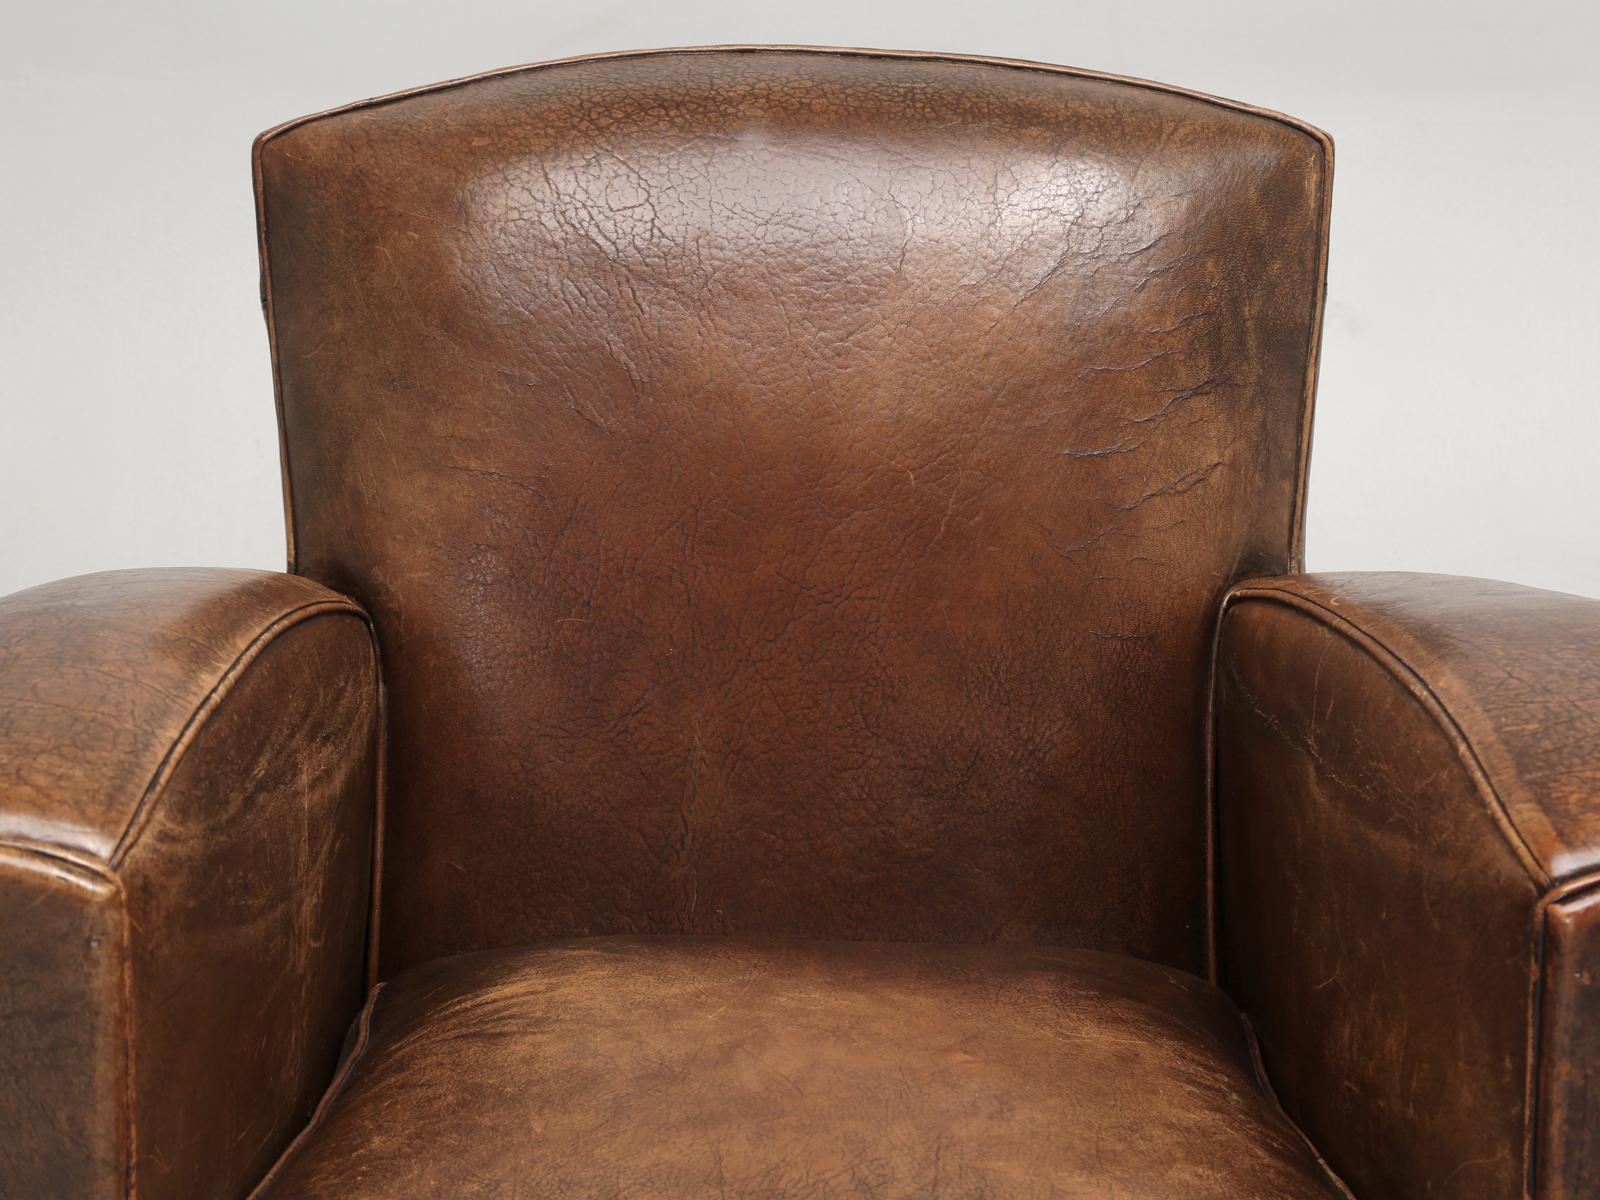 Hand-Crafted French Leather Club Chairs Restored Internally Cosmetically Original Third Avail